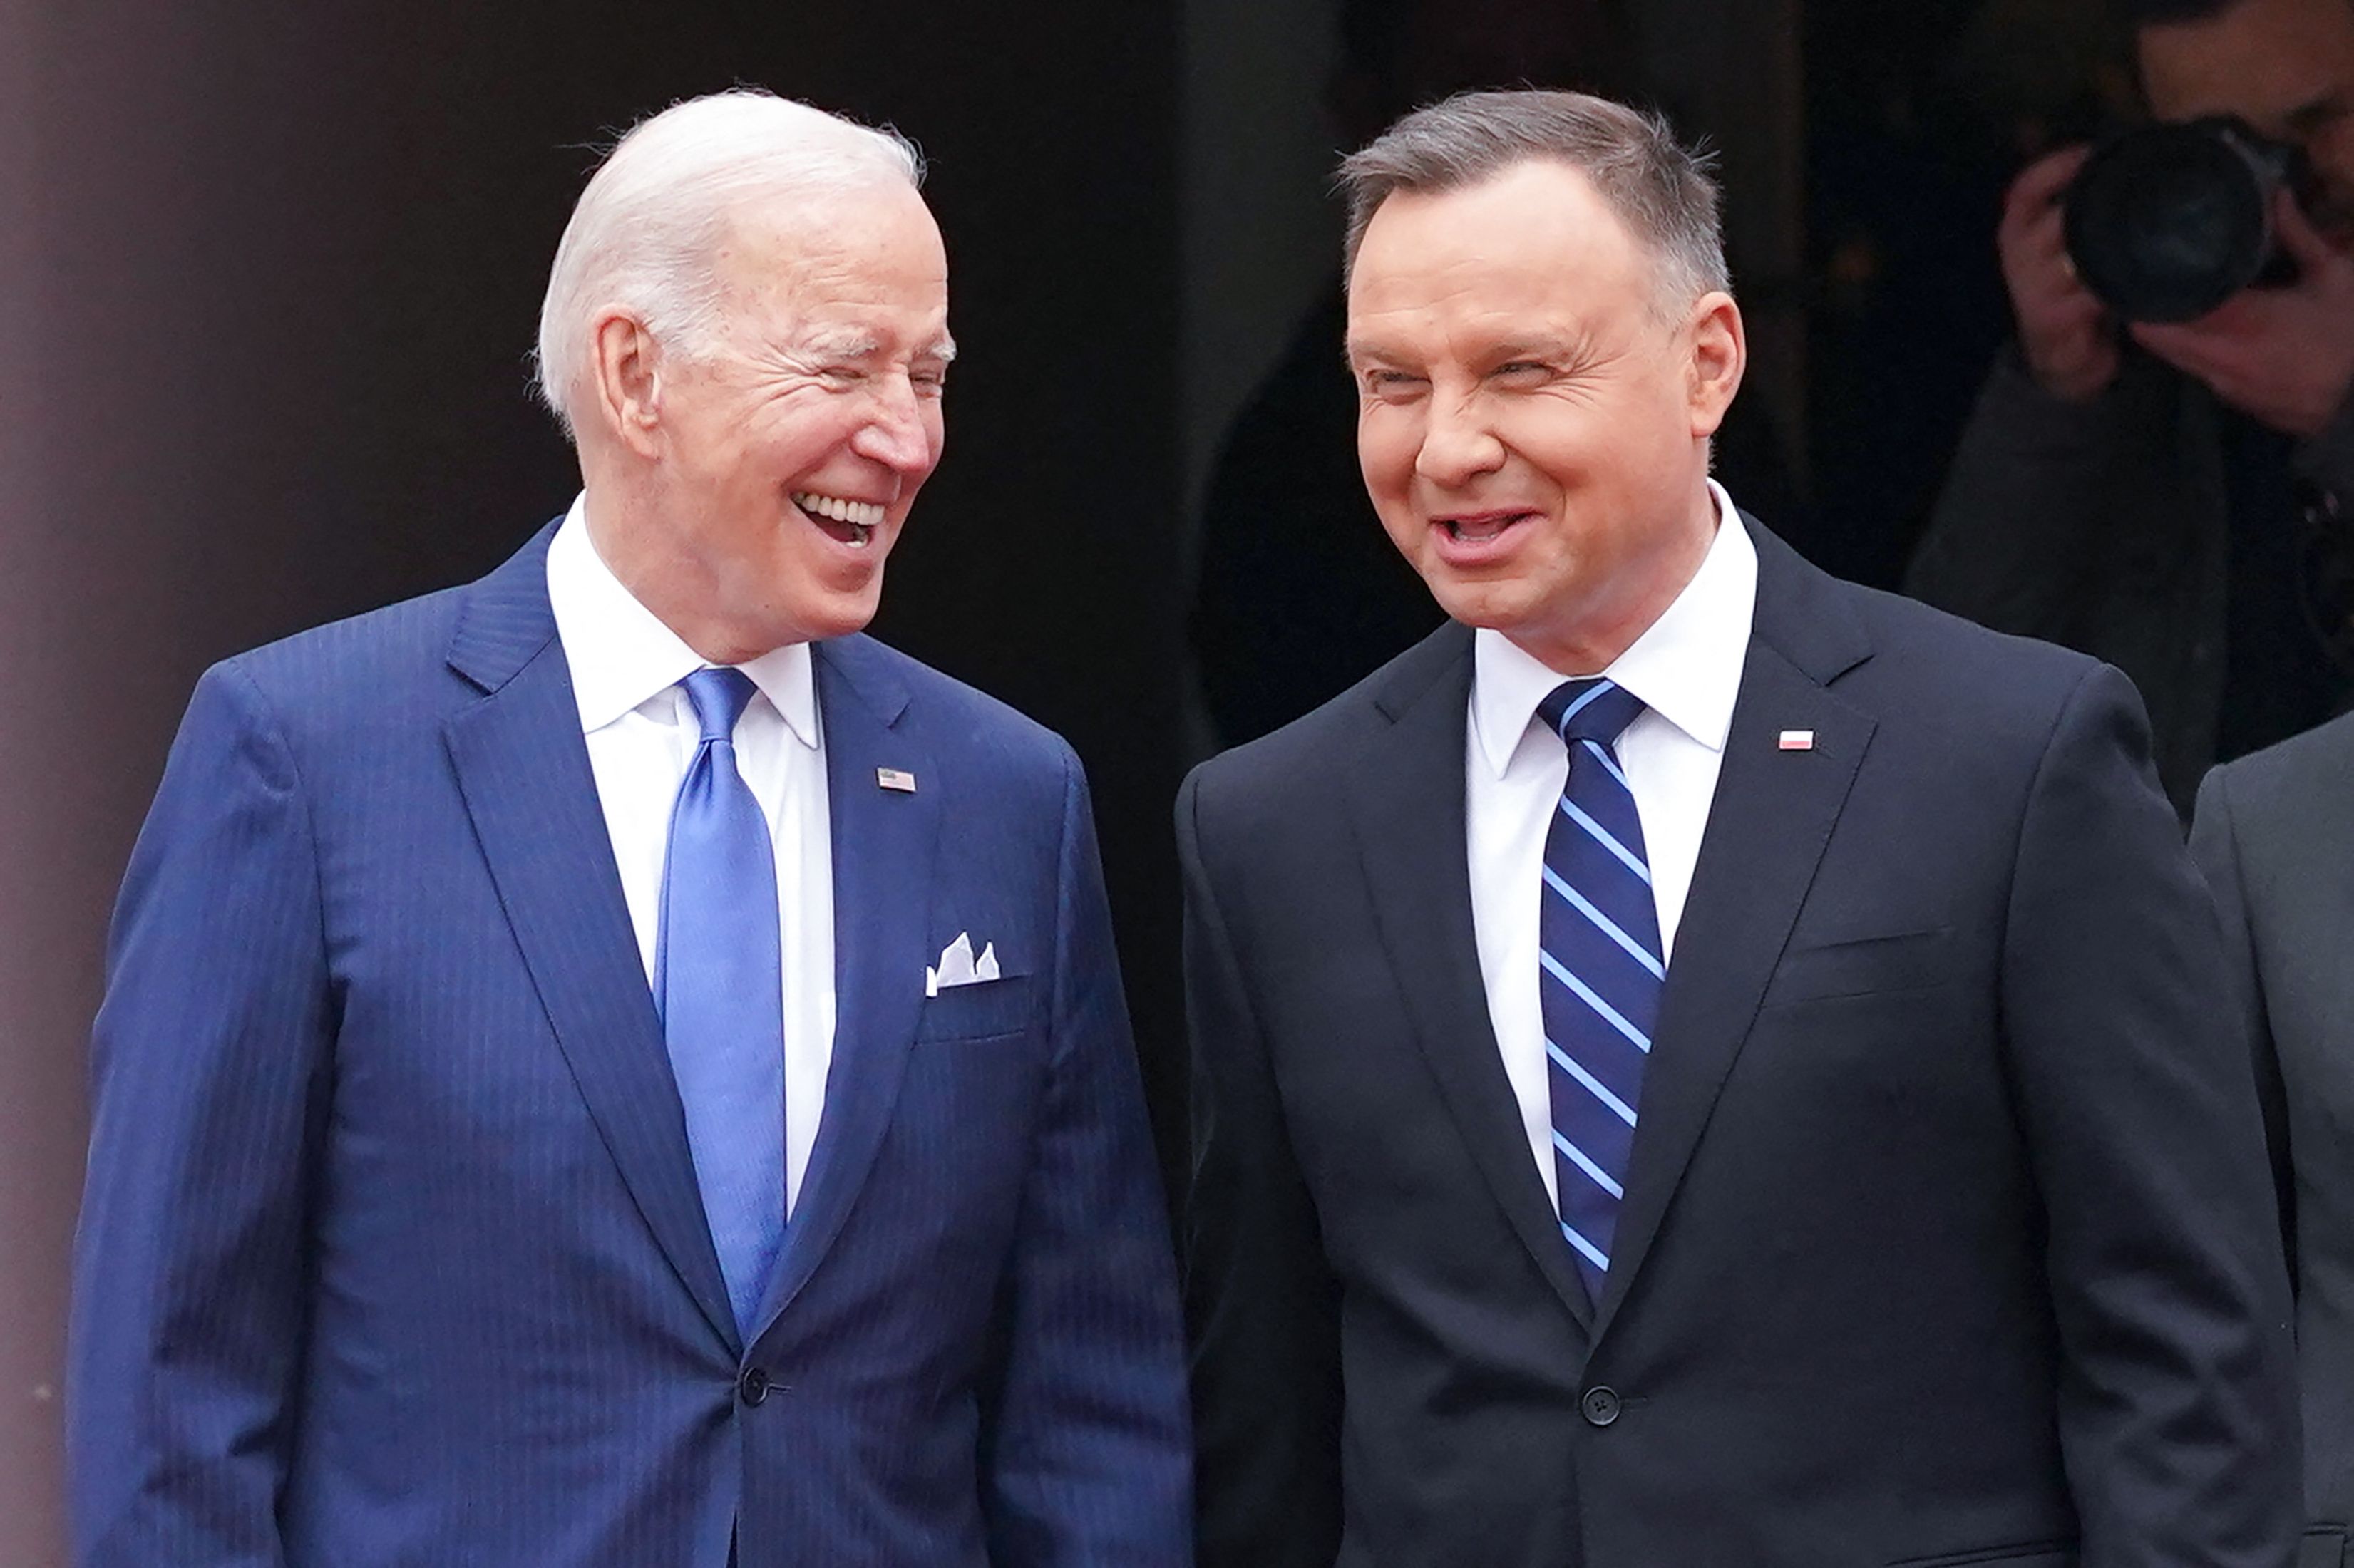 President Joe Biden (L) and Polish President Andrzej Duda shake react during an official wecoming ceremony prior to a meeting in Warsaw on March 26, 2022.